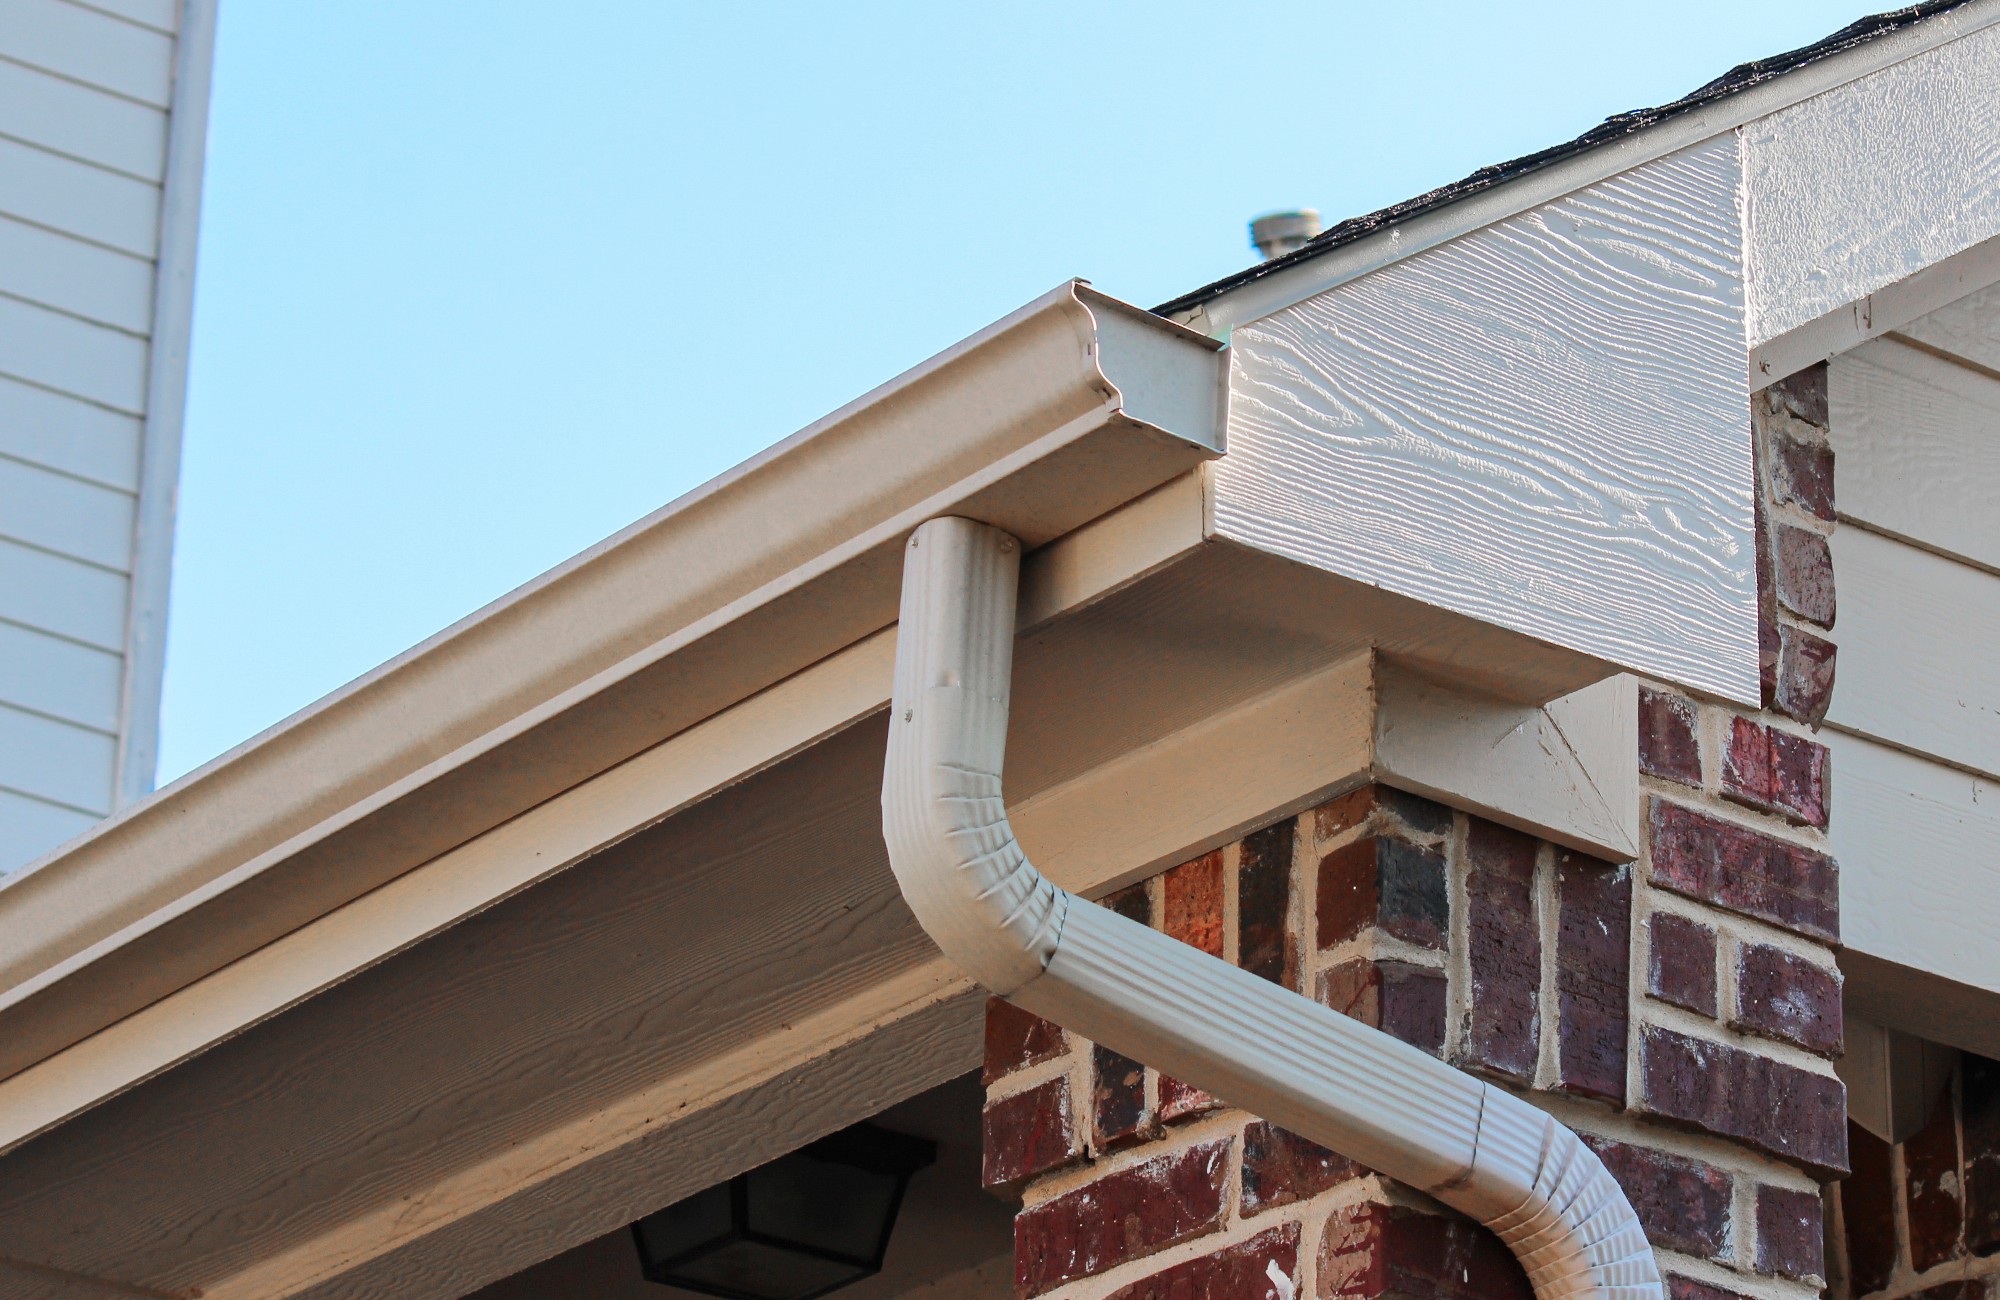 Gutters installed by QRHI on a brick home